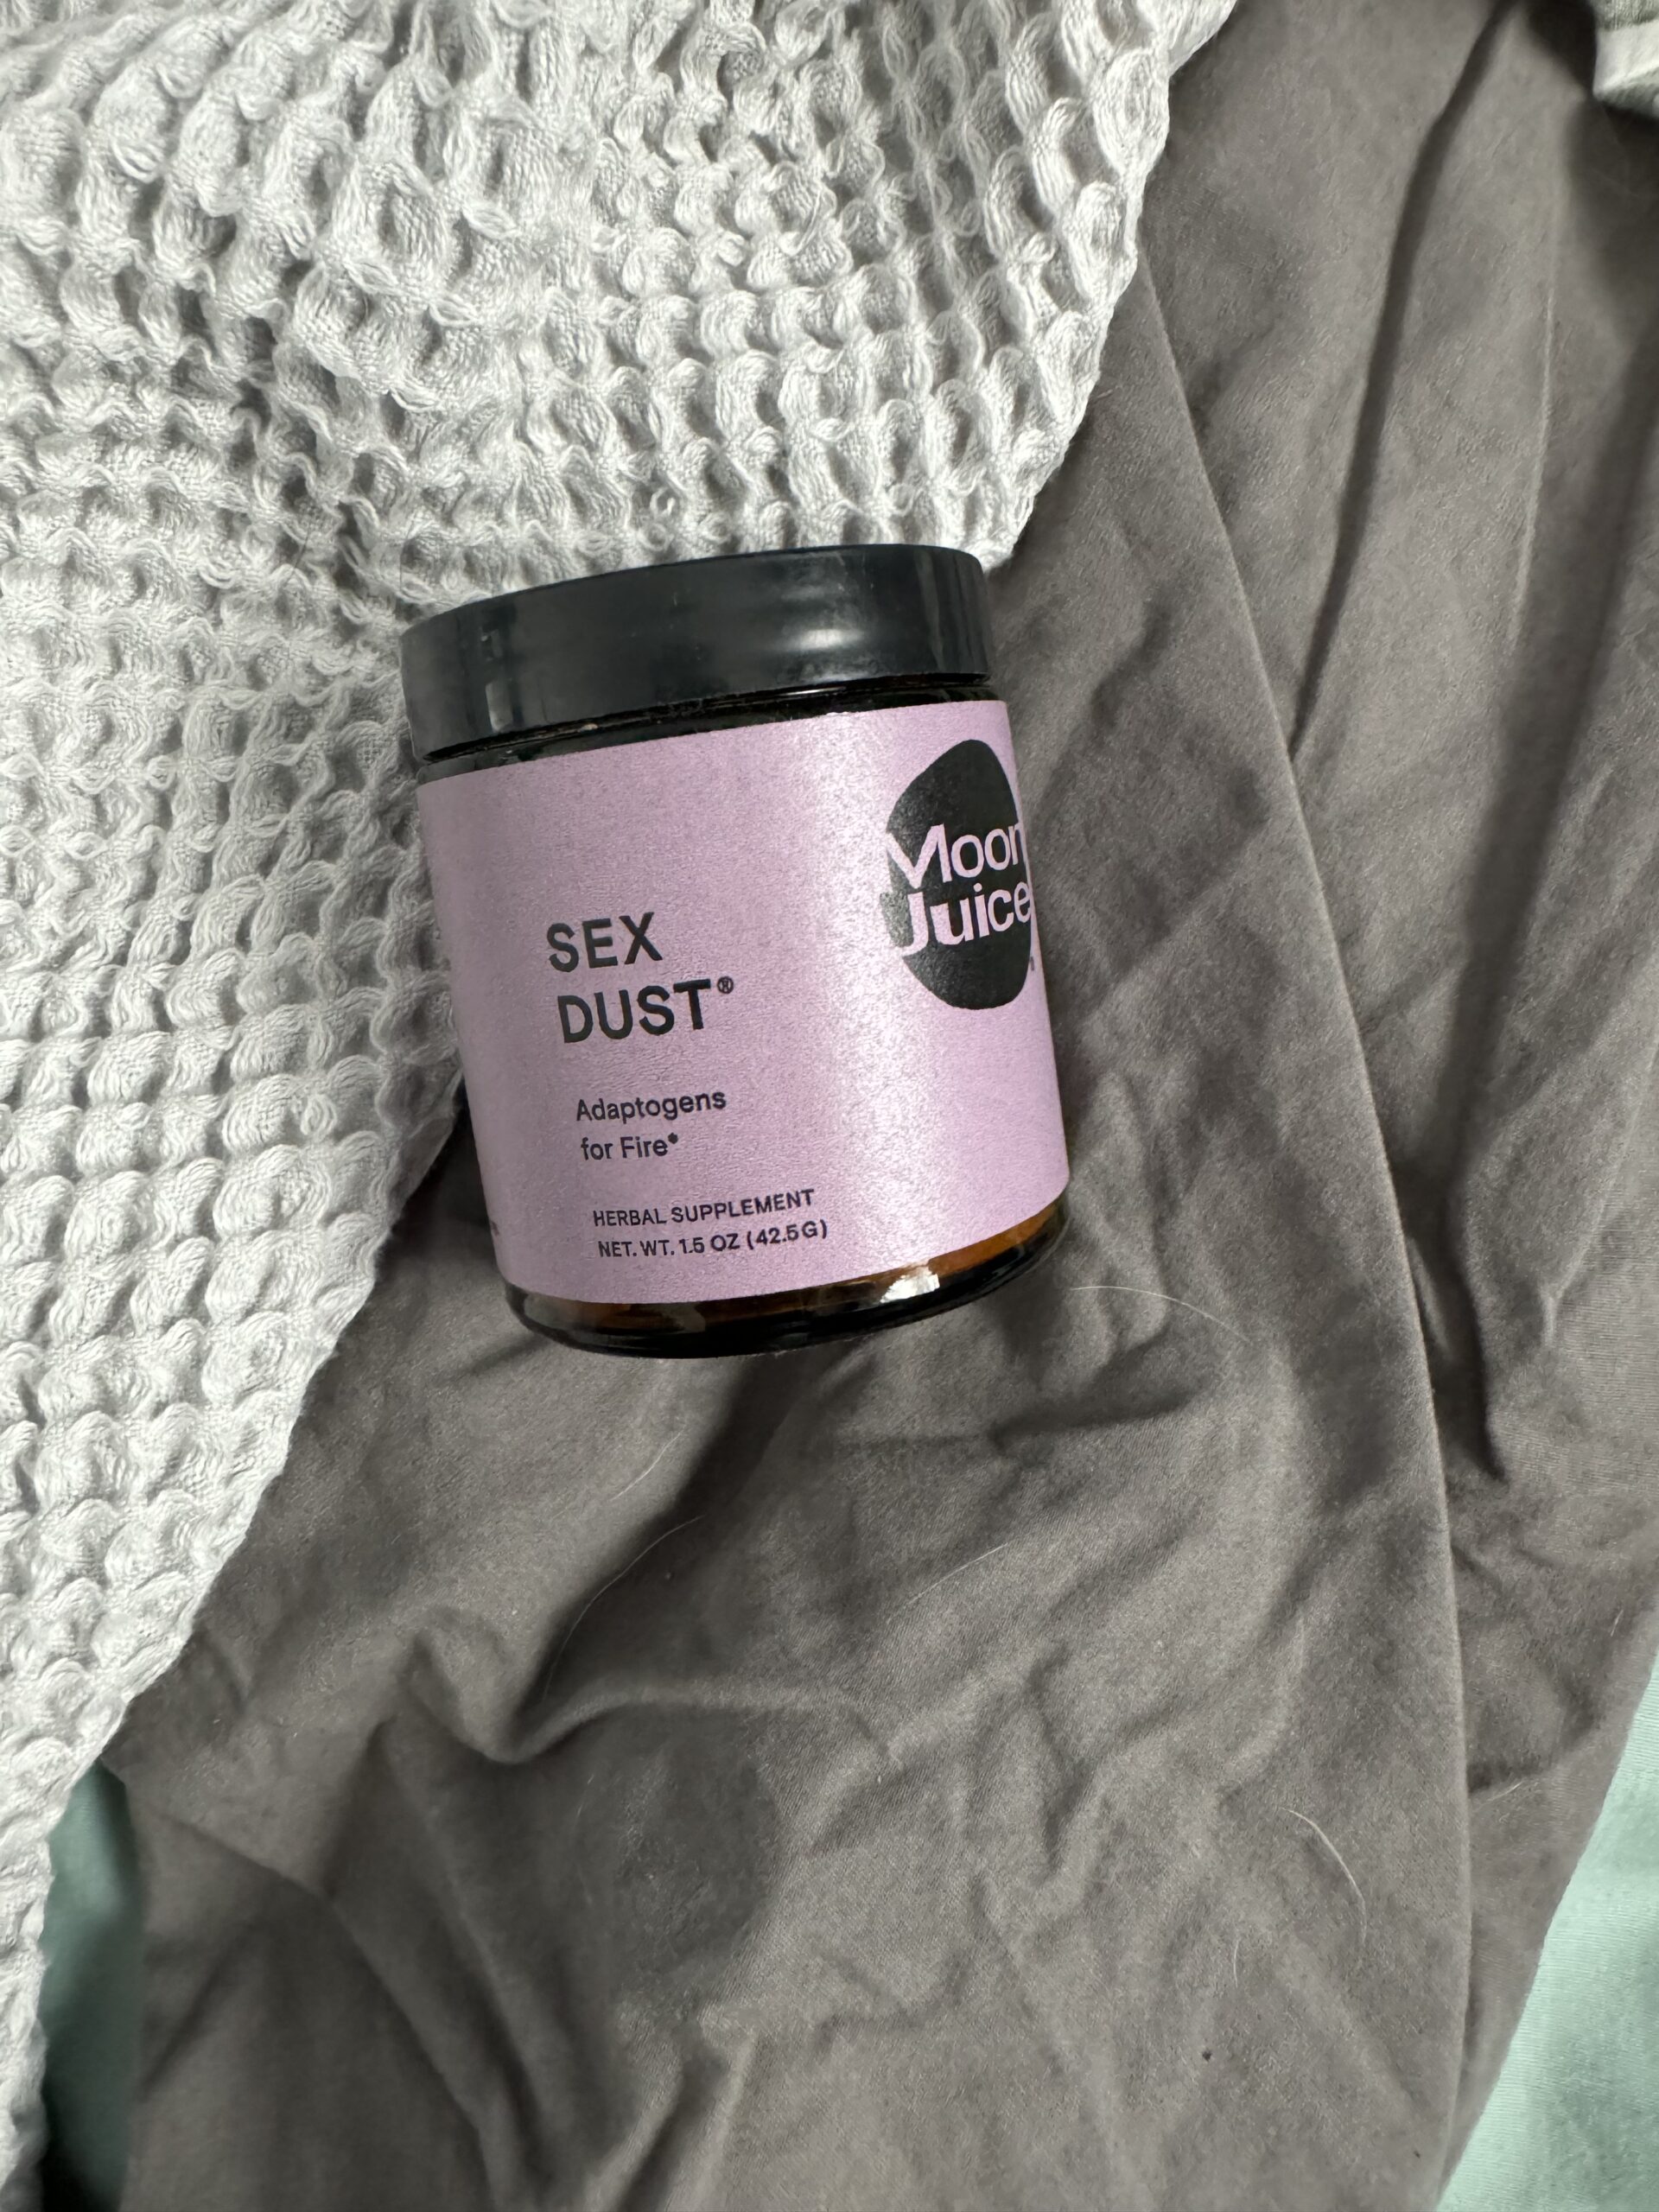 A jar of "sex dust" by moon juice, an adaptogens dietary supplement, resting on a crumpled grey fabric with a knitted blanket partially visible.